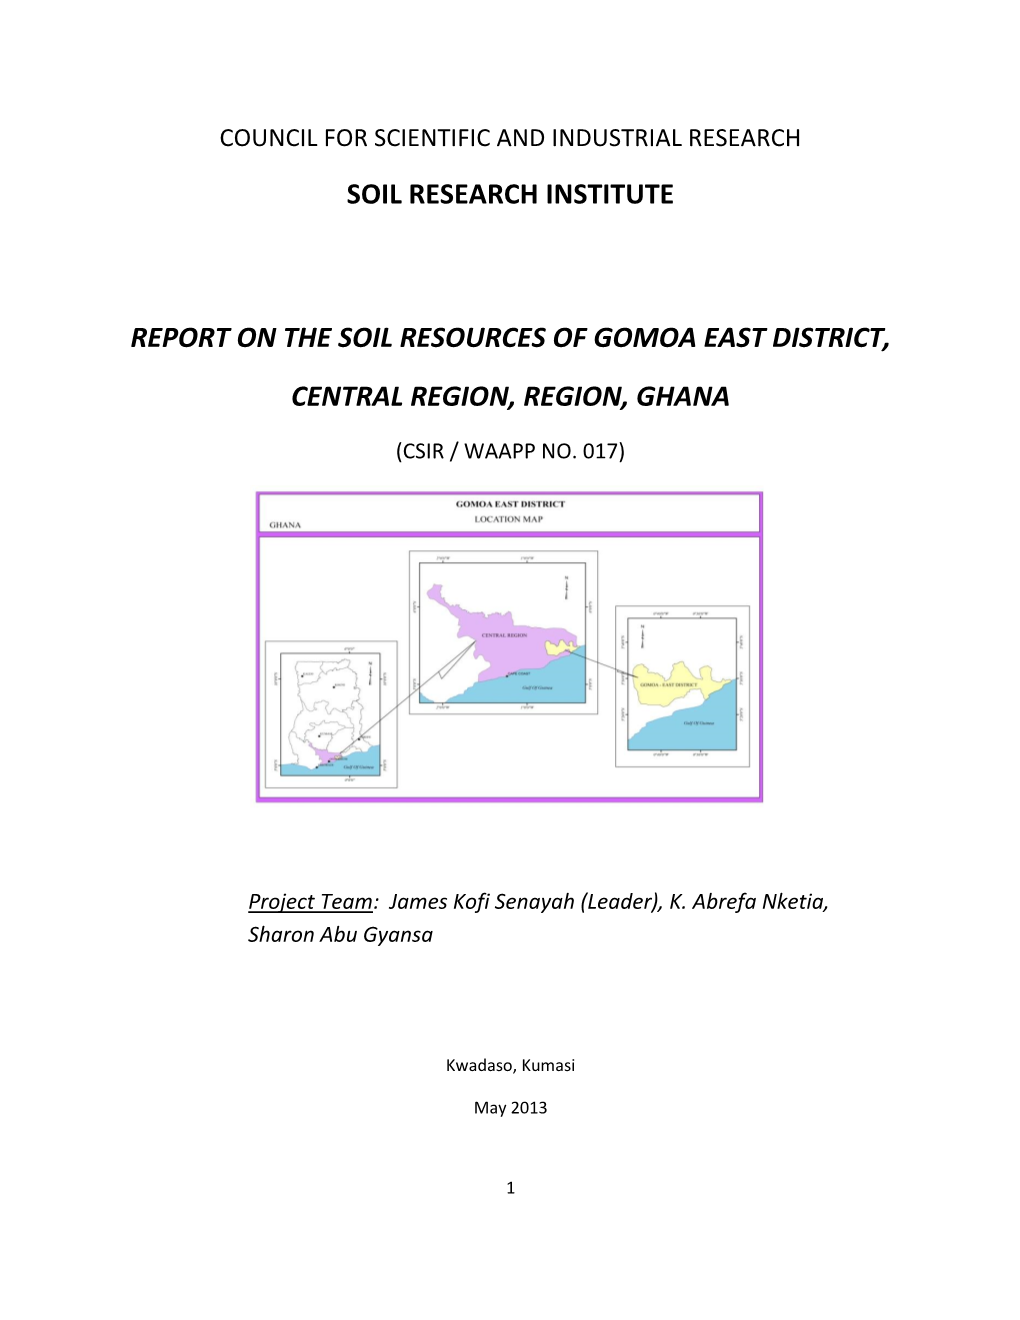 Soil Research Institute Report on the Soil